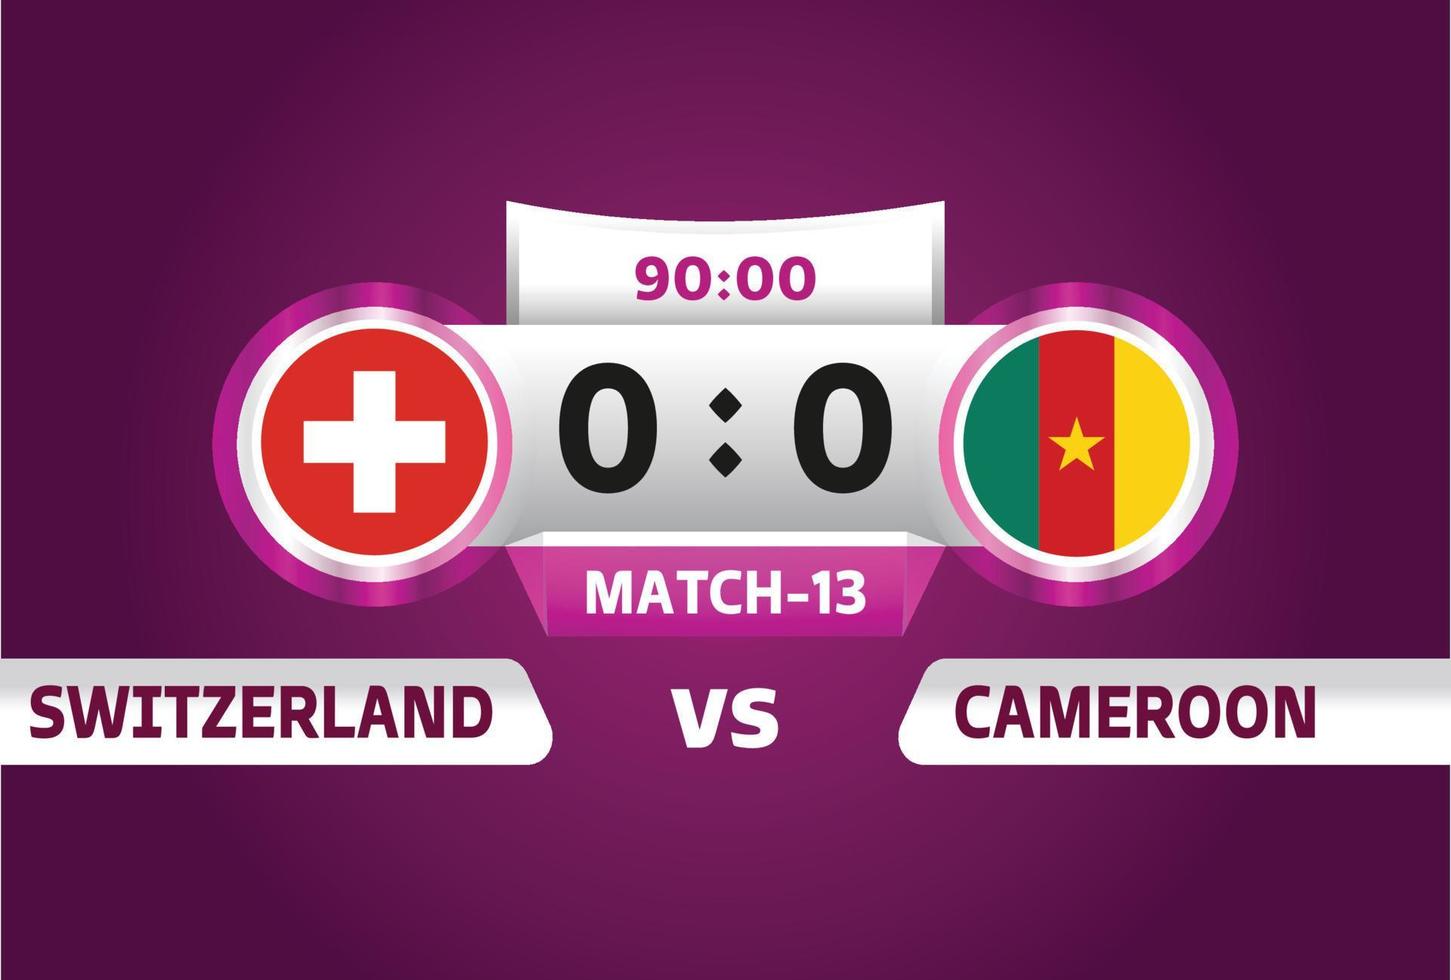 Switzerland vs cameroon, Football 2022, Group G. World Football Competition championship match versus teams intro sport background, championship competition final poster, vector illustration.